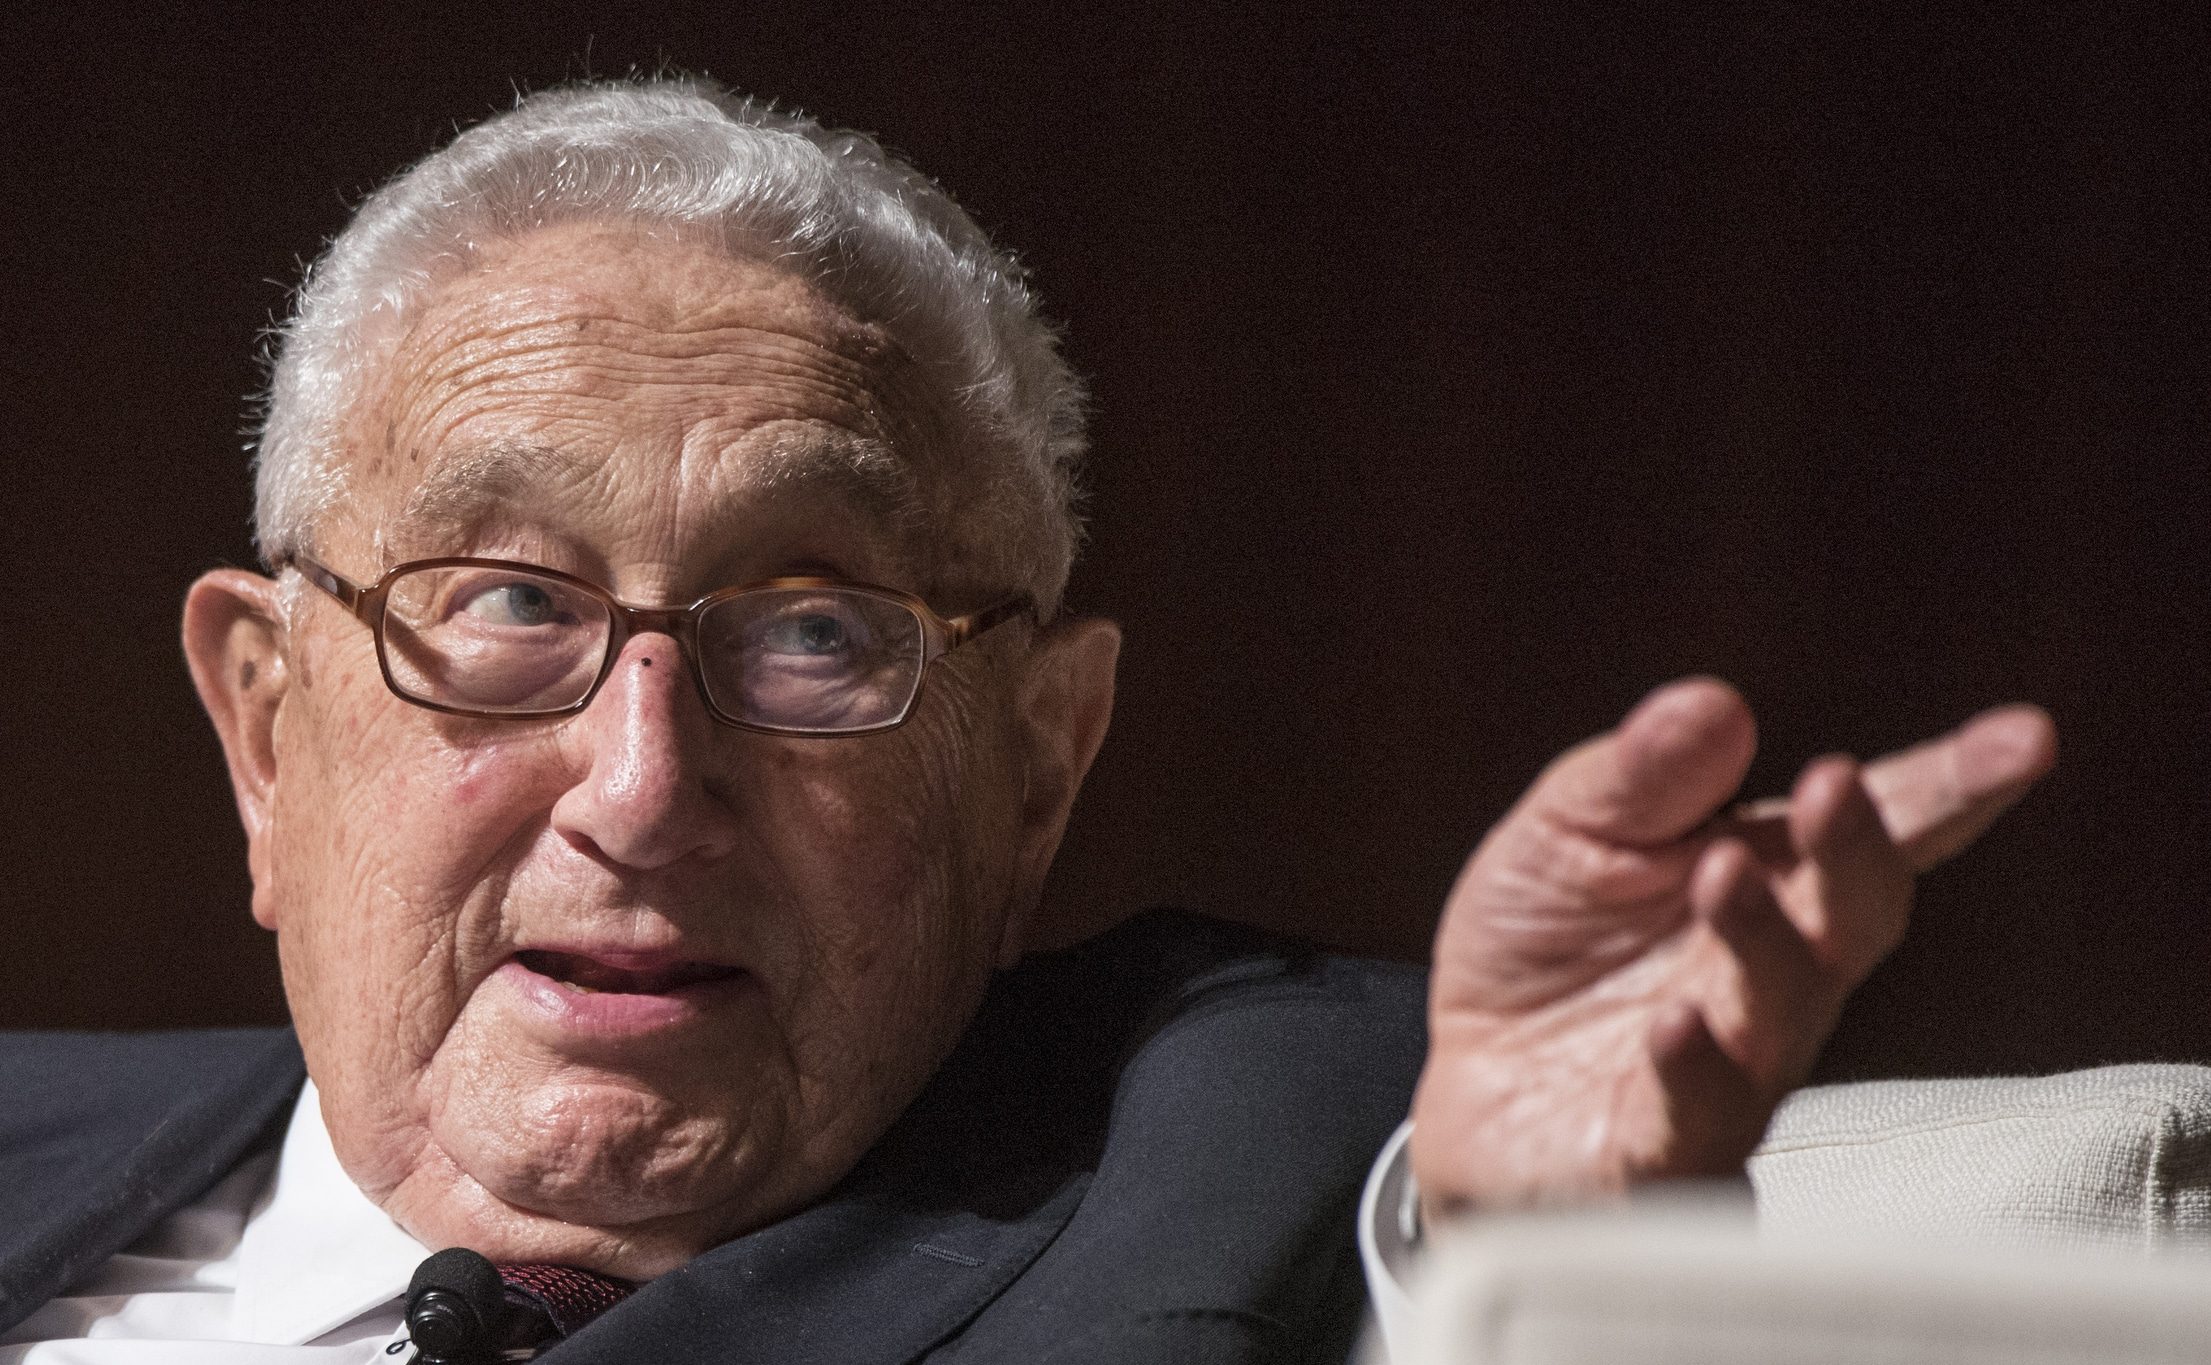 Henry Kissinger at the LBJ library in 2016 (Jay Godwin/LBJ Library/Wikimedia Commons)